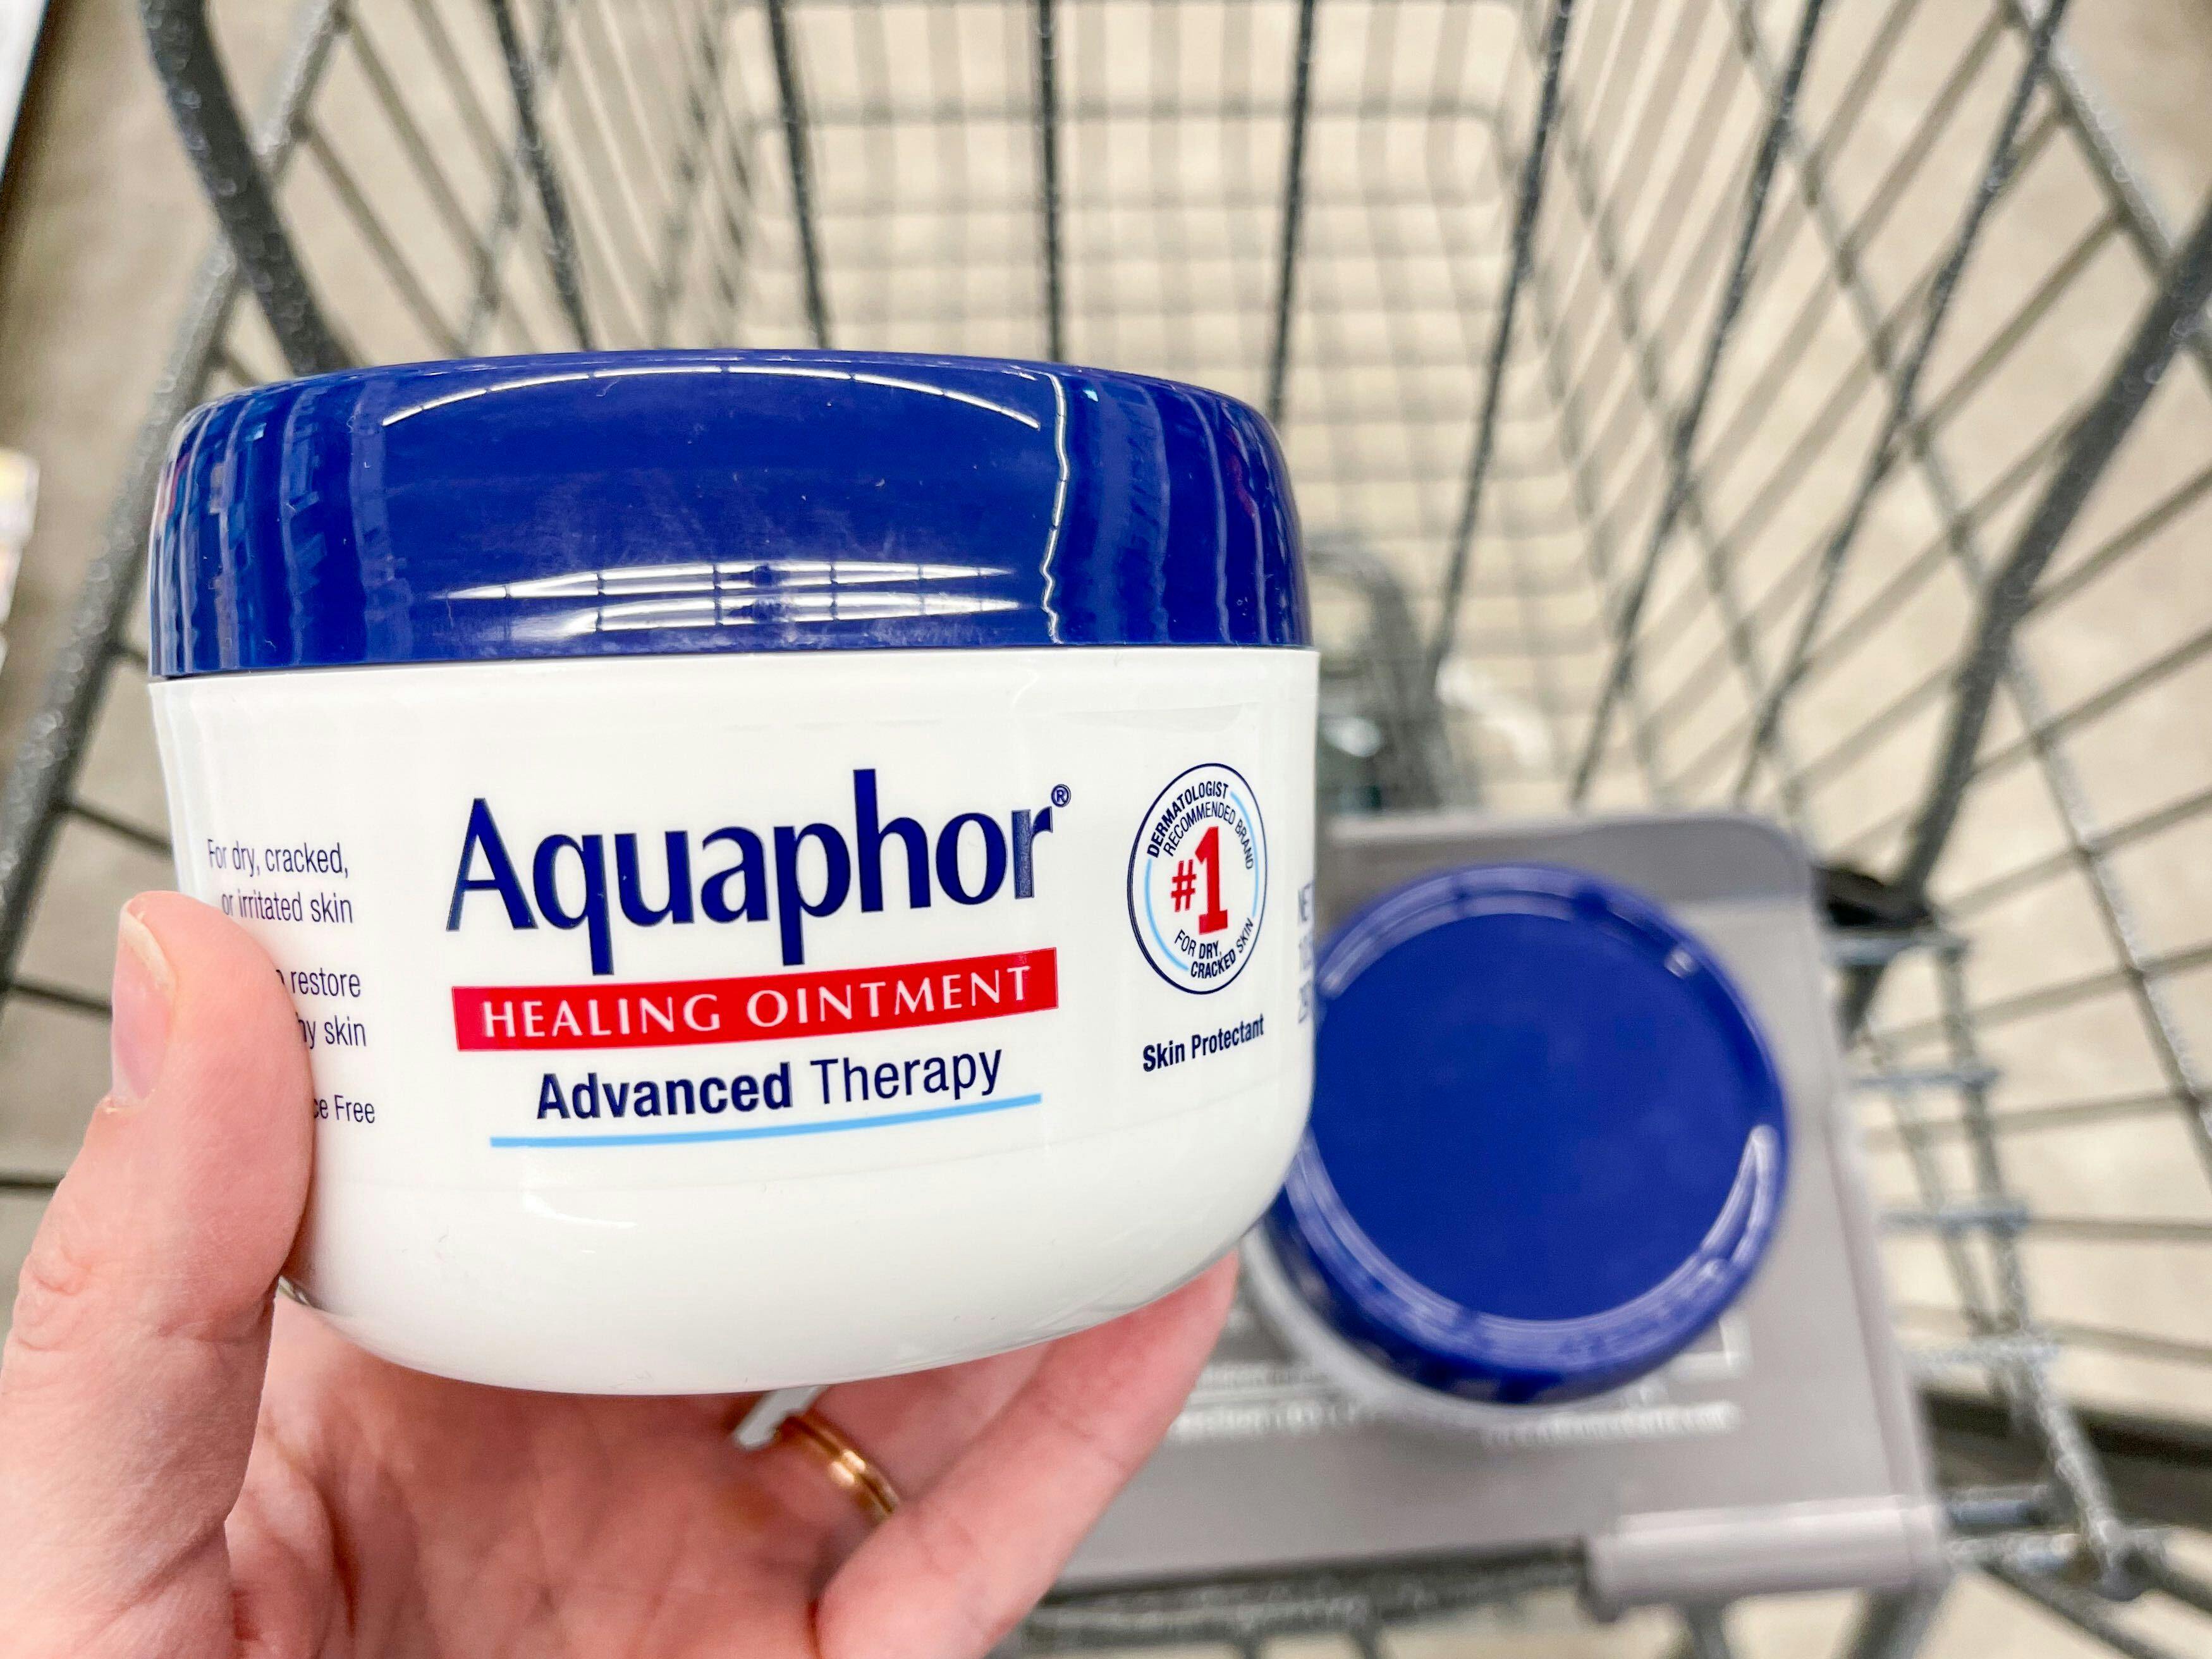 An Aquaphor jar held out by hand in front of another Aquaphor jar sitting in a store cart